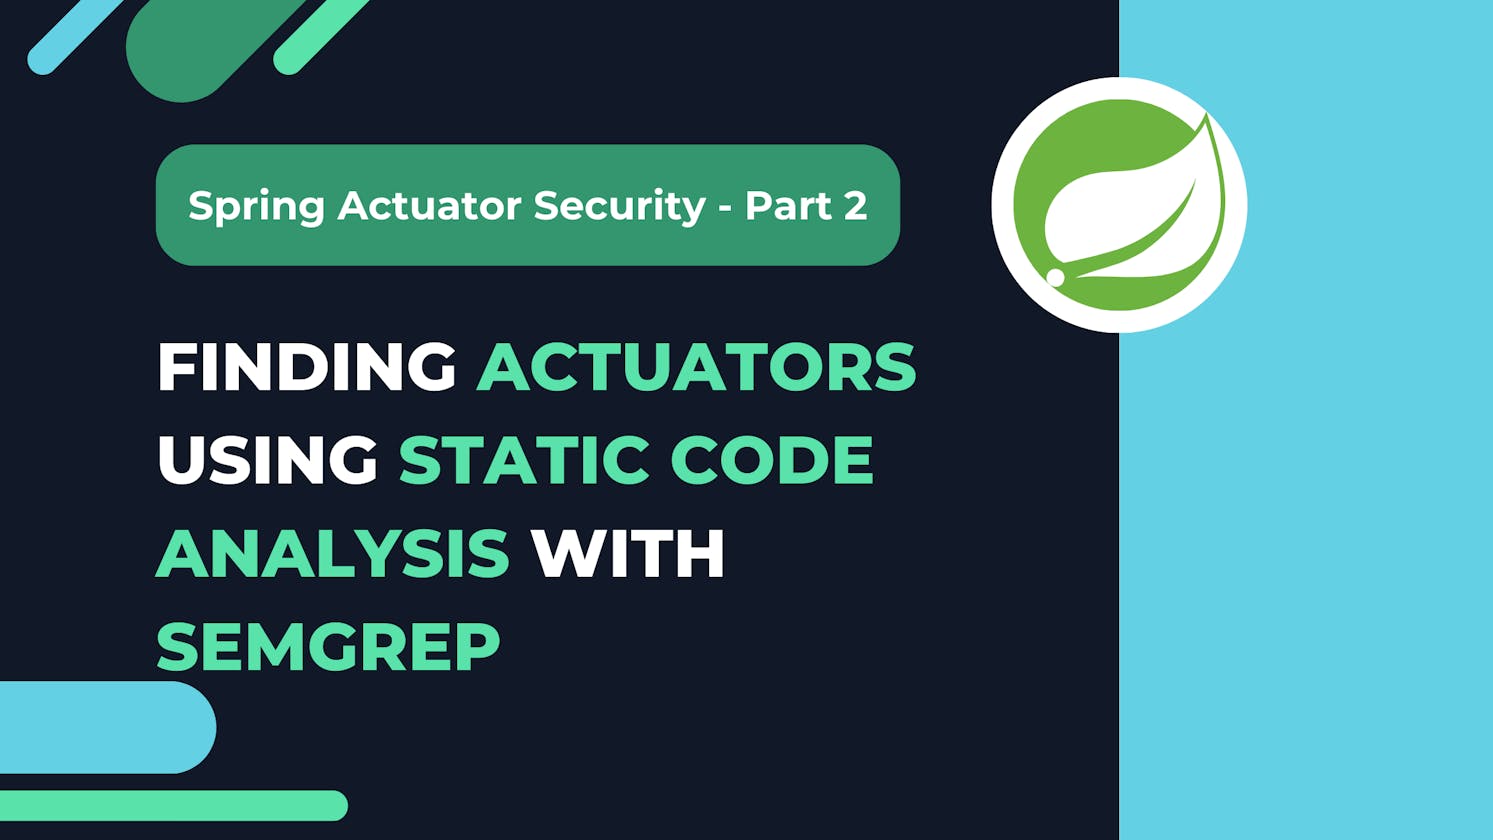 Spring Actuator Security, Part 2: Finding Actuators using Static Code Analysis with semgrep